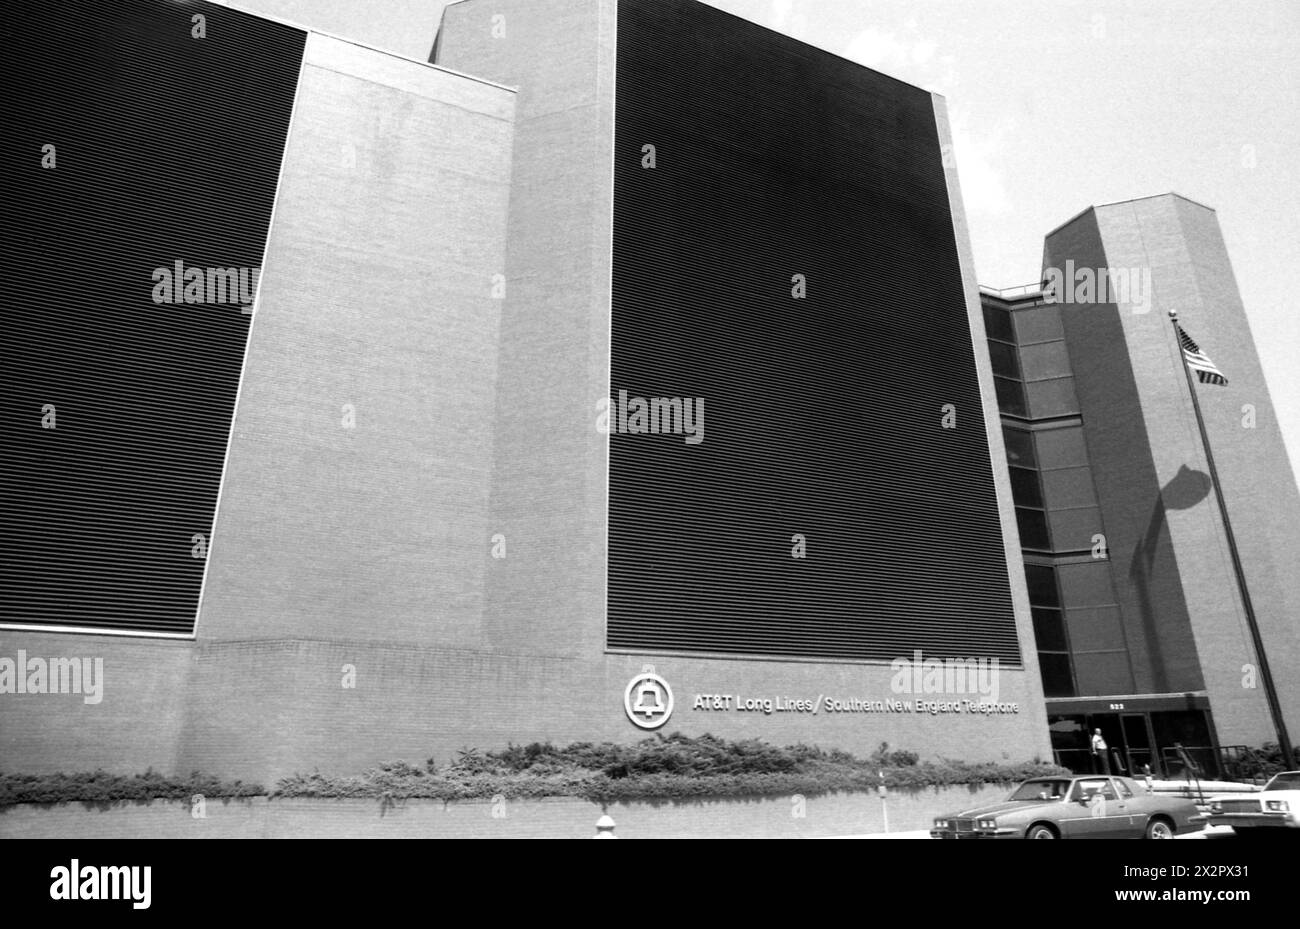 Connecticut, U.S.A., 1982. Facade of a large AT&T/New England Telephone building. Stock Photo